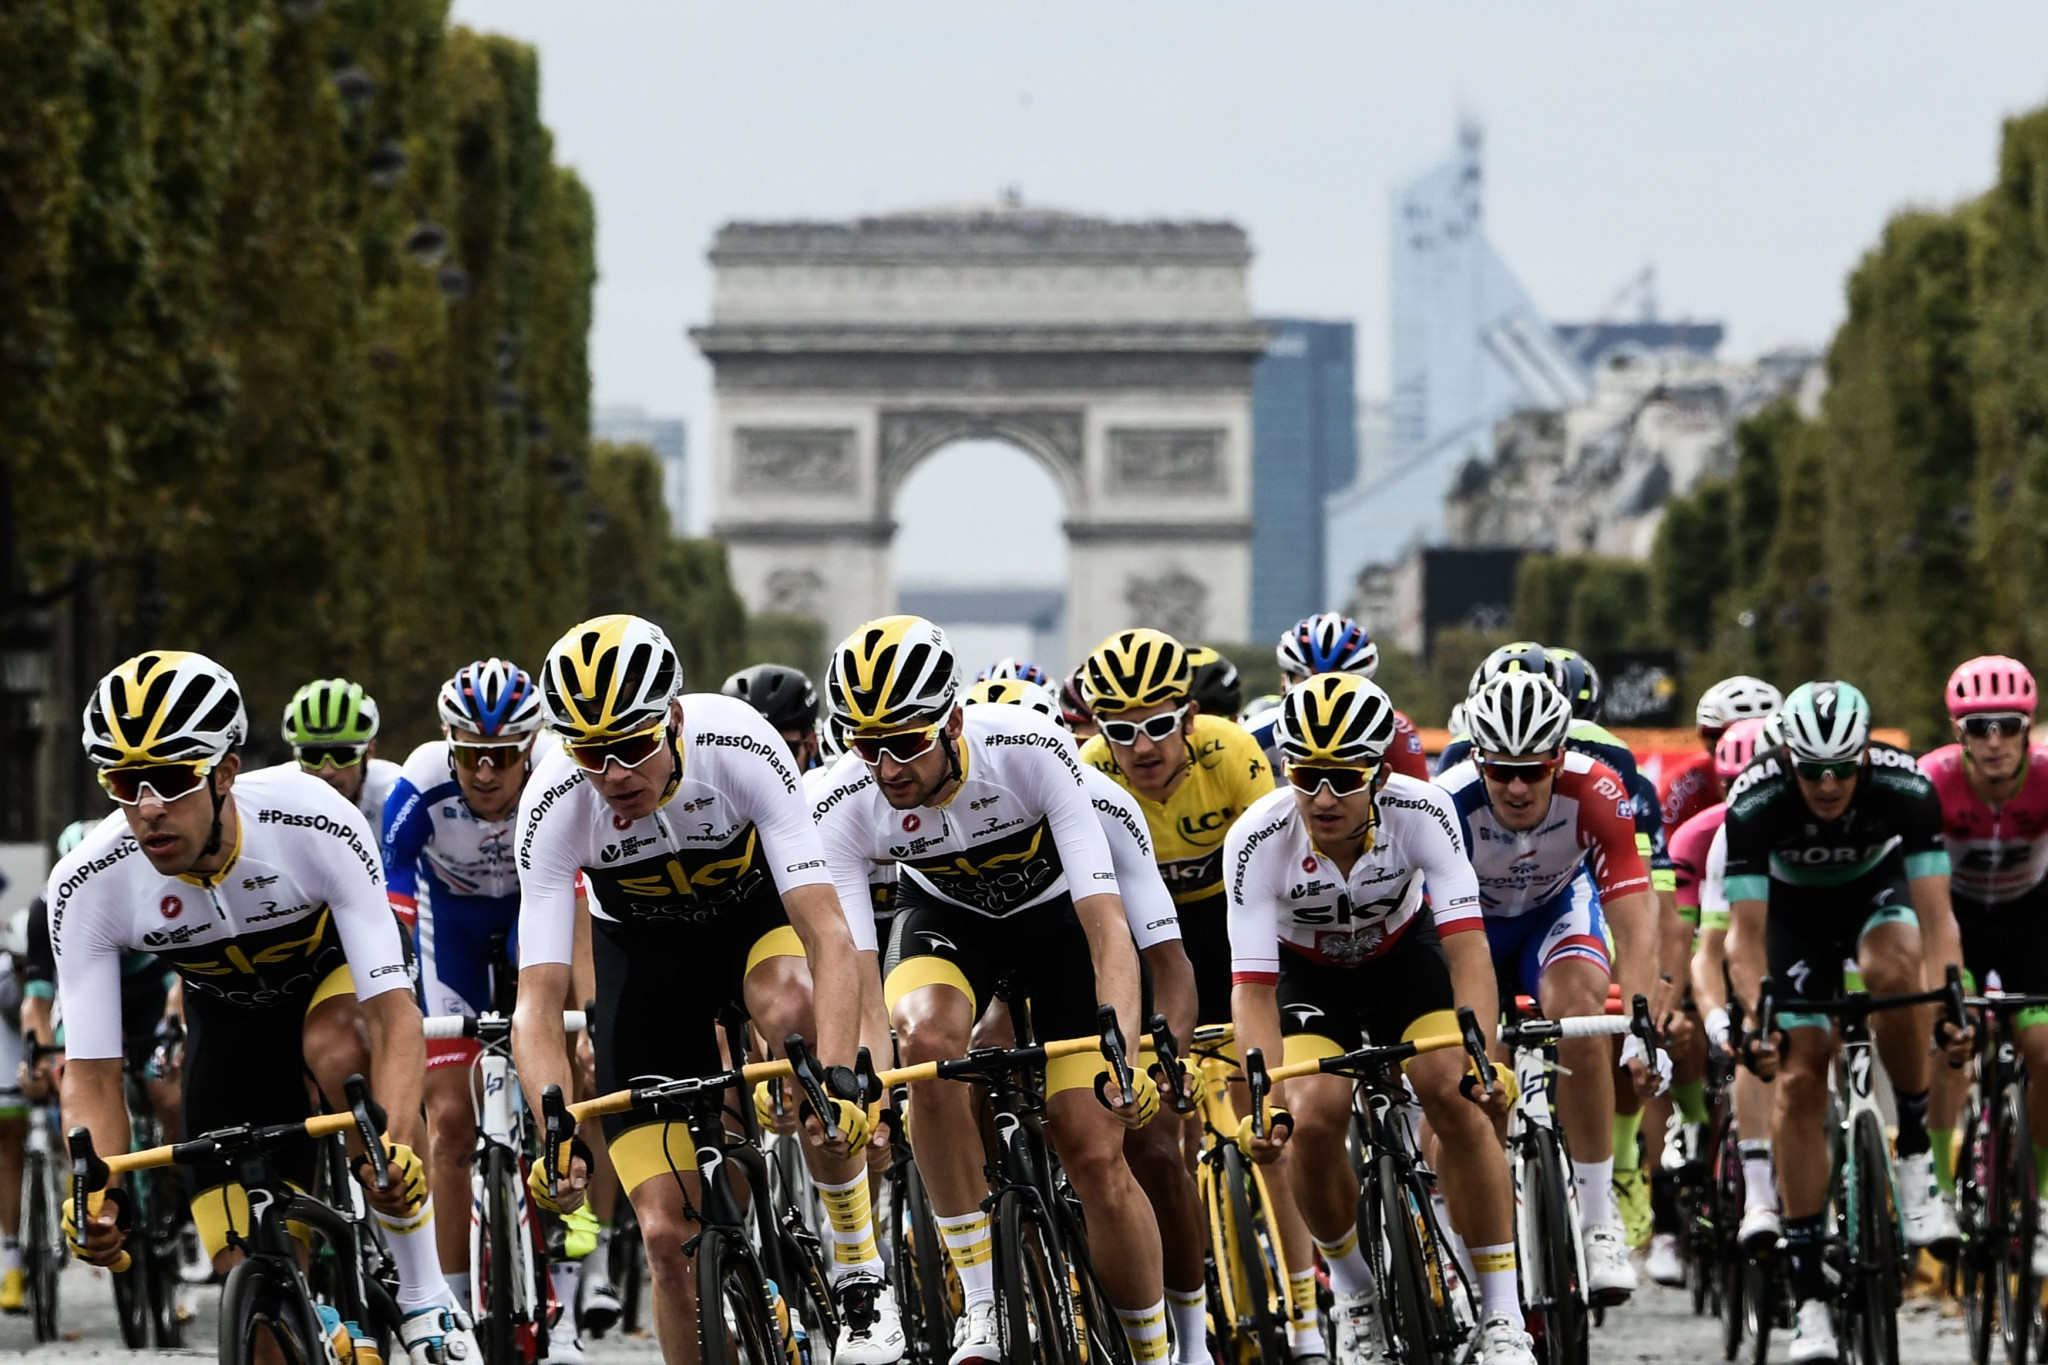 The Tour de France will take place earlier due to Tokyo 2020 ©Getty Images